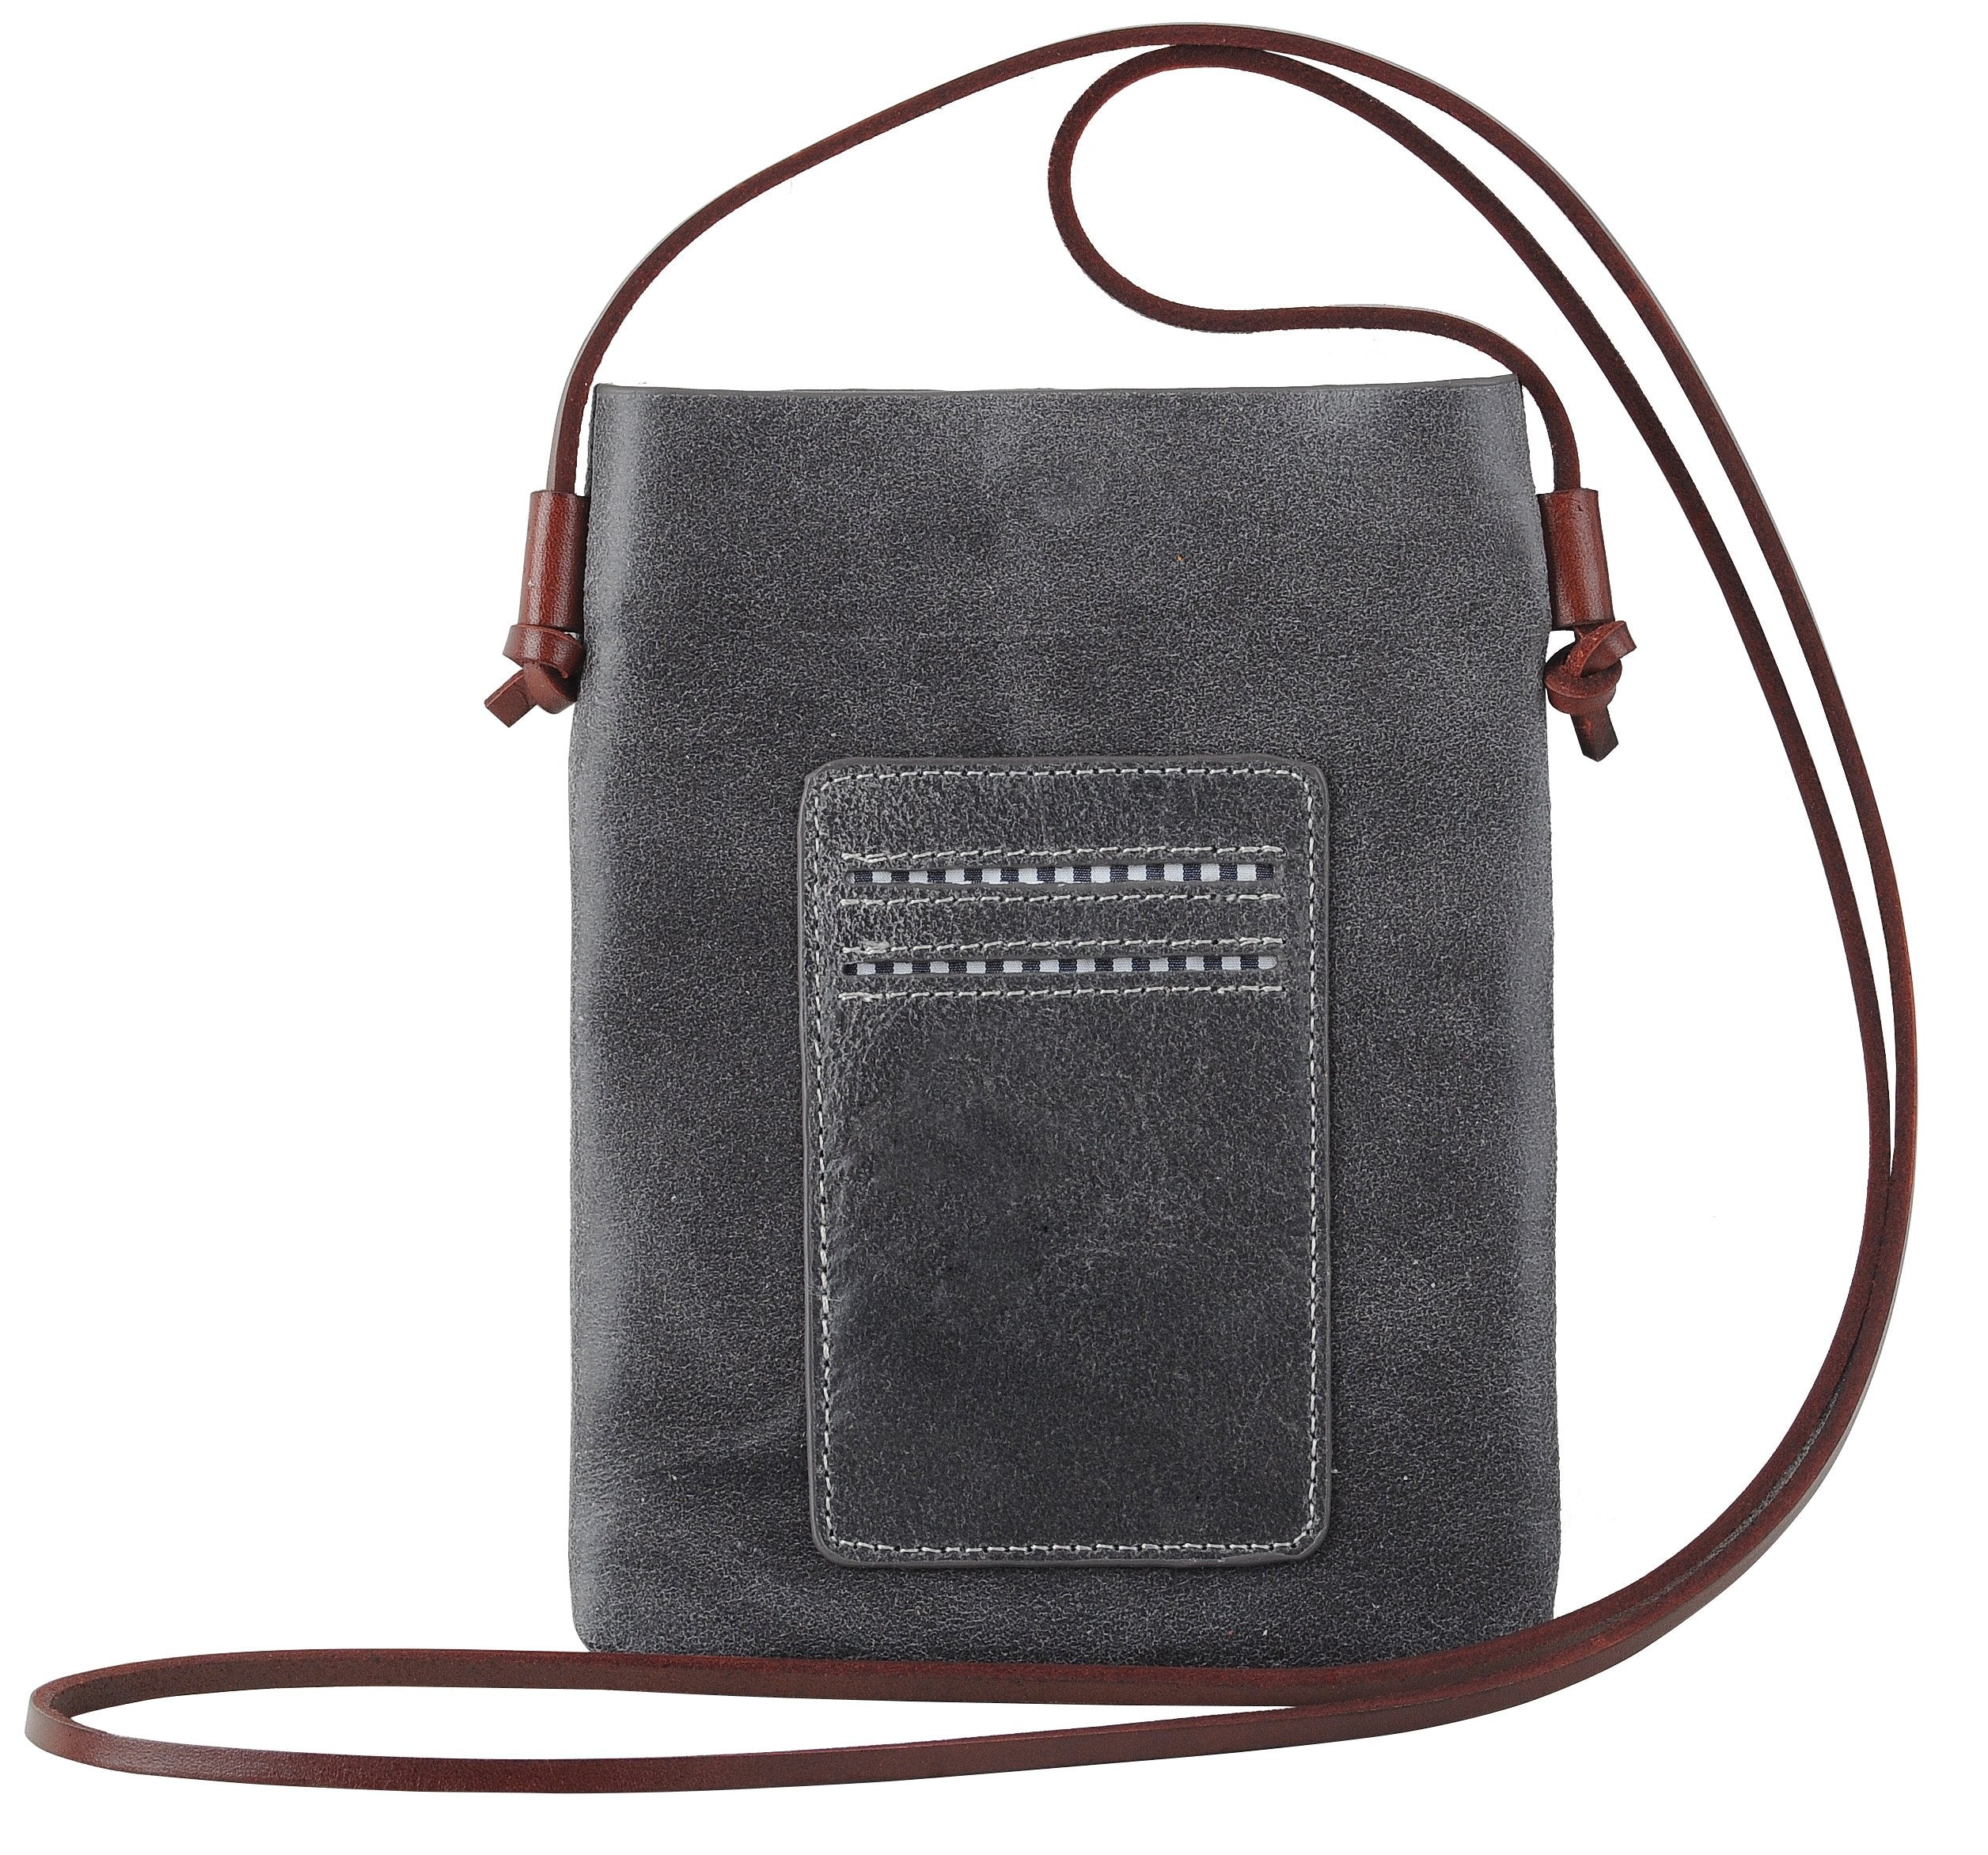 Okay, let's see how fast this will go as someone is going to get an insane  deal on this limited edition crossbody bag!